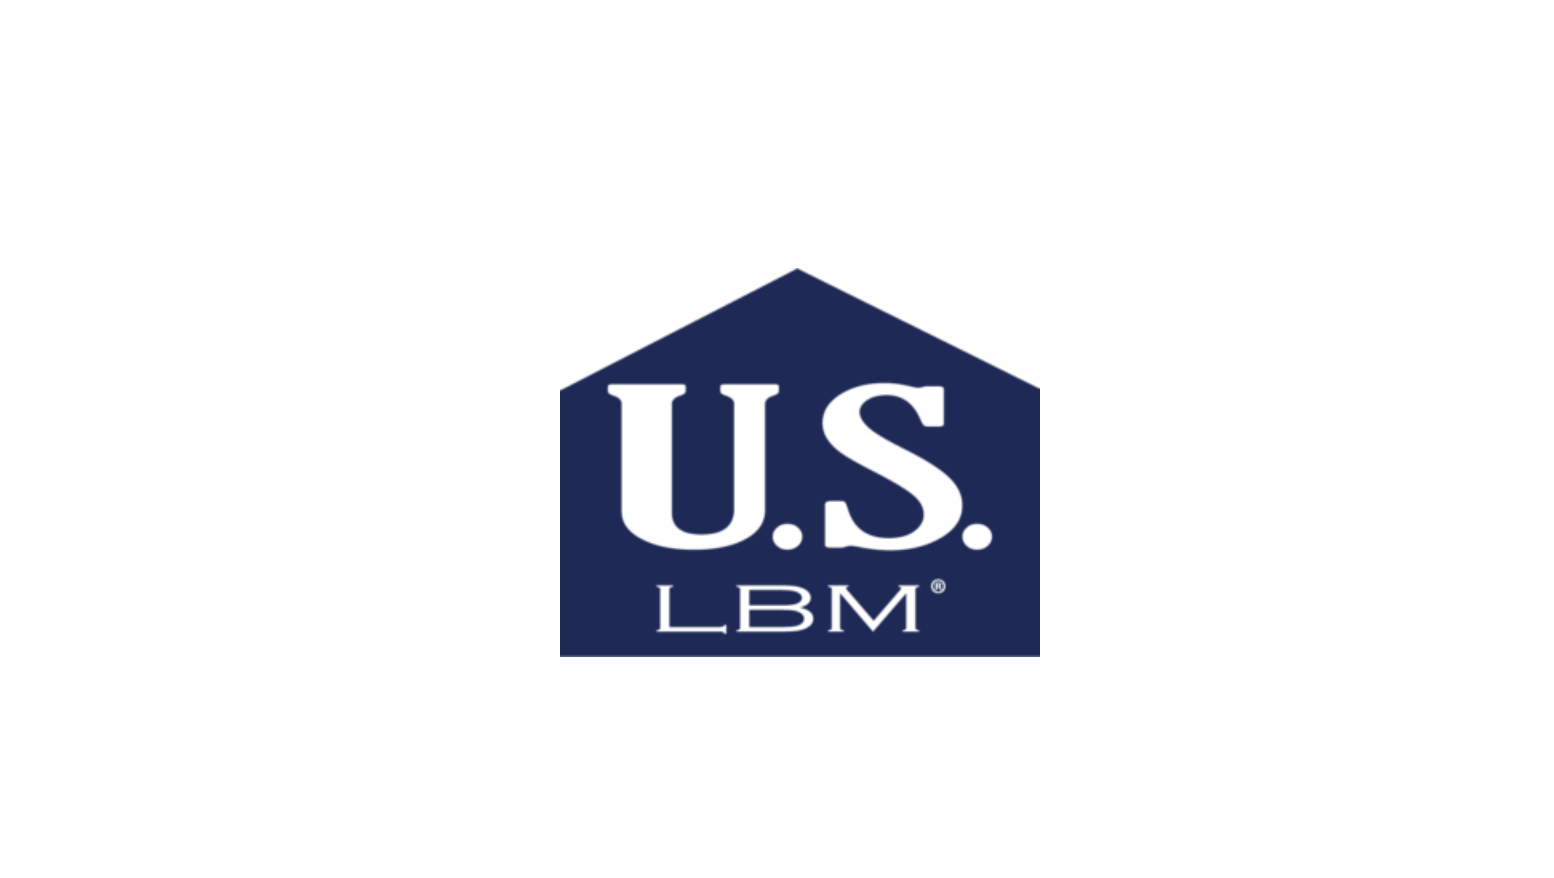 Buffalo Grove, Illinois-based US LBM said July 8 it has reached a deal to acquire Foxworth-Galbraith Lumber Company, a Texas-based building products supplier to building professionals and homeowners in the Southwest U.S.